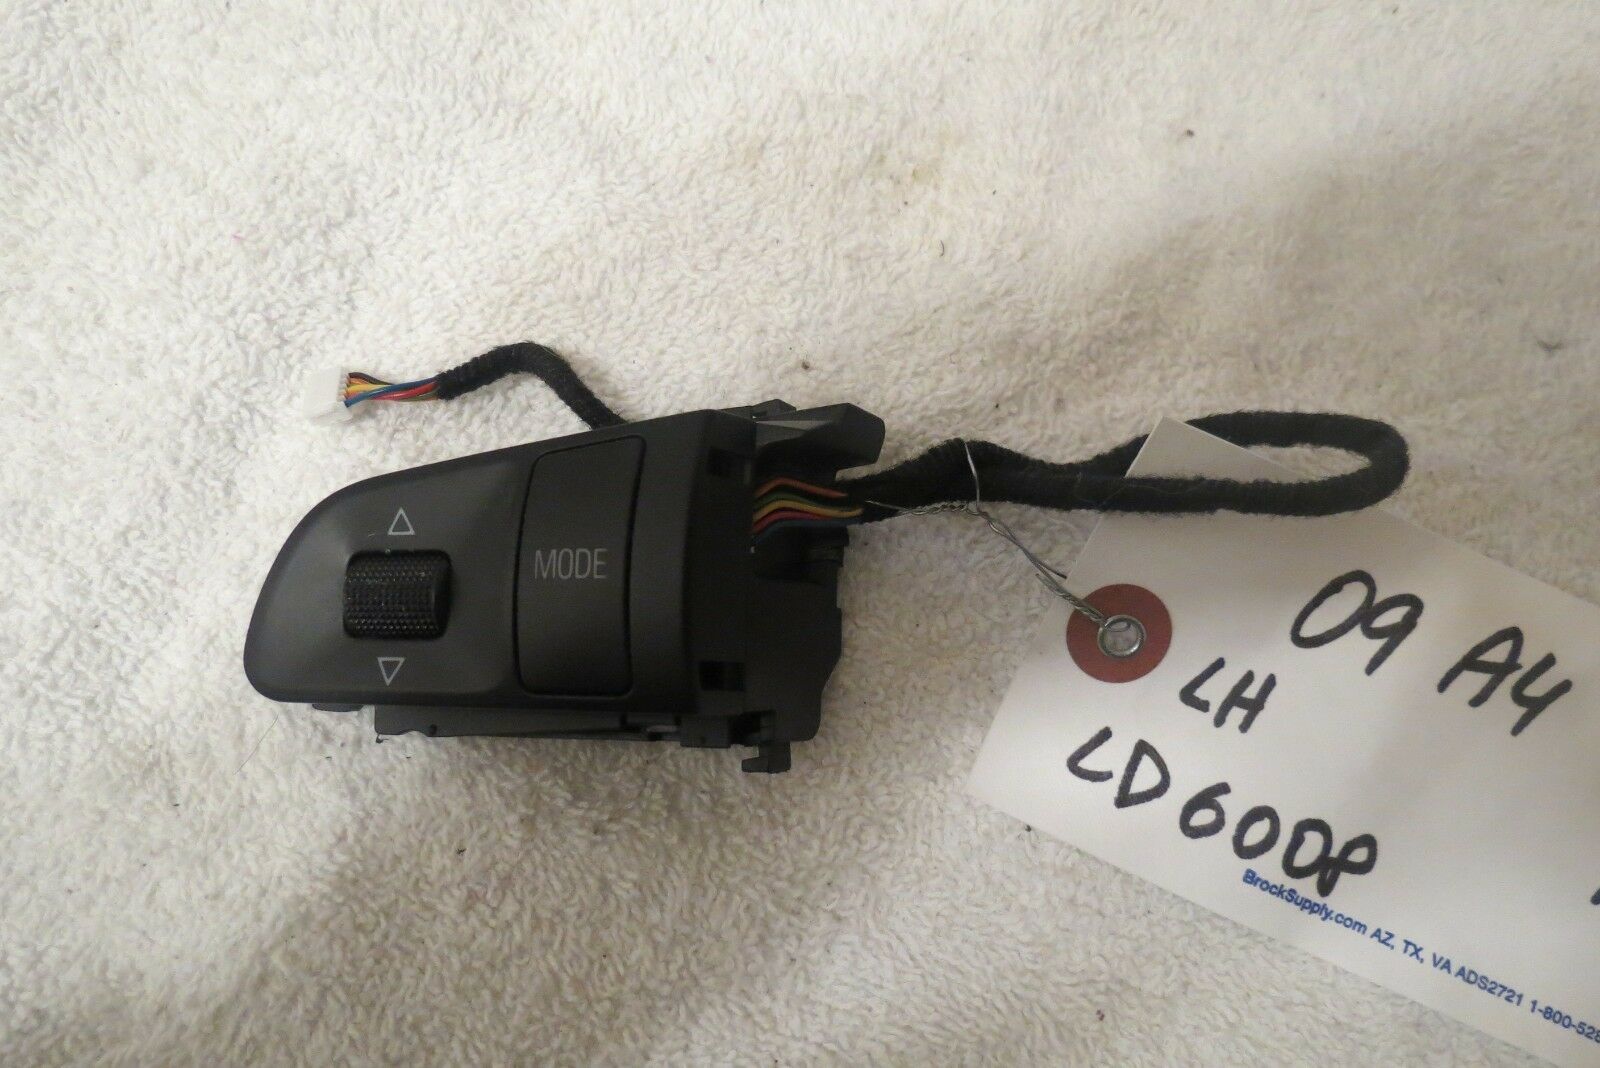 Primary image for 05 06 07 08 09 10 11 Audi A4 Steering Wheel Radio Mode Switch 4F0951527C #2446W